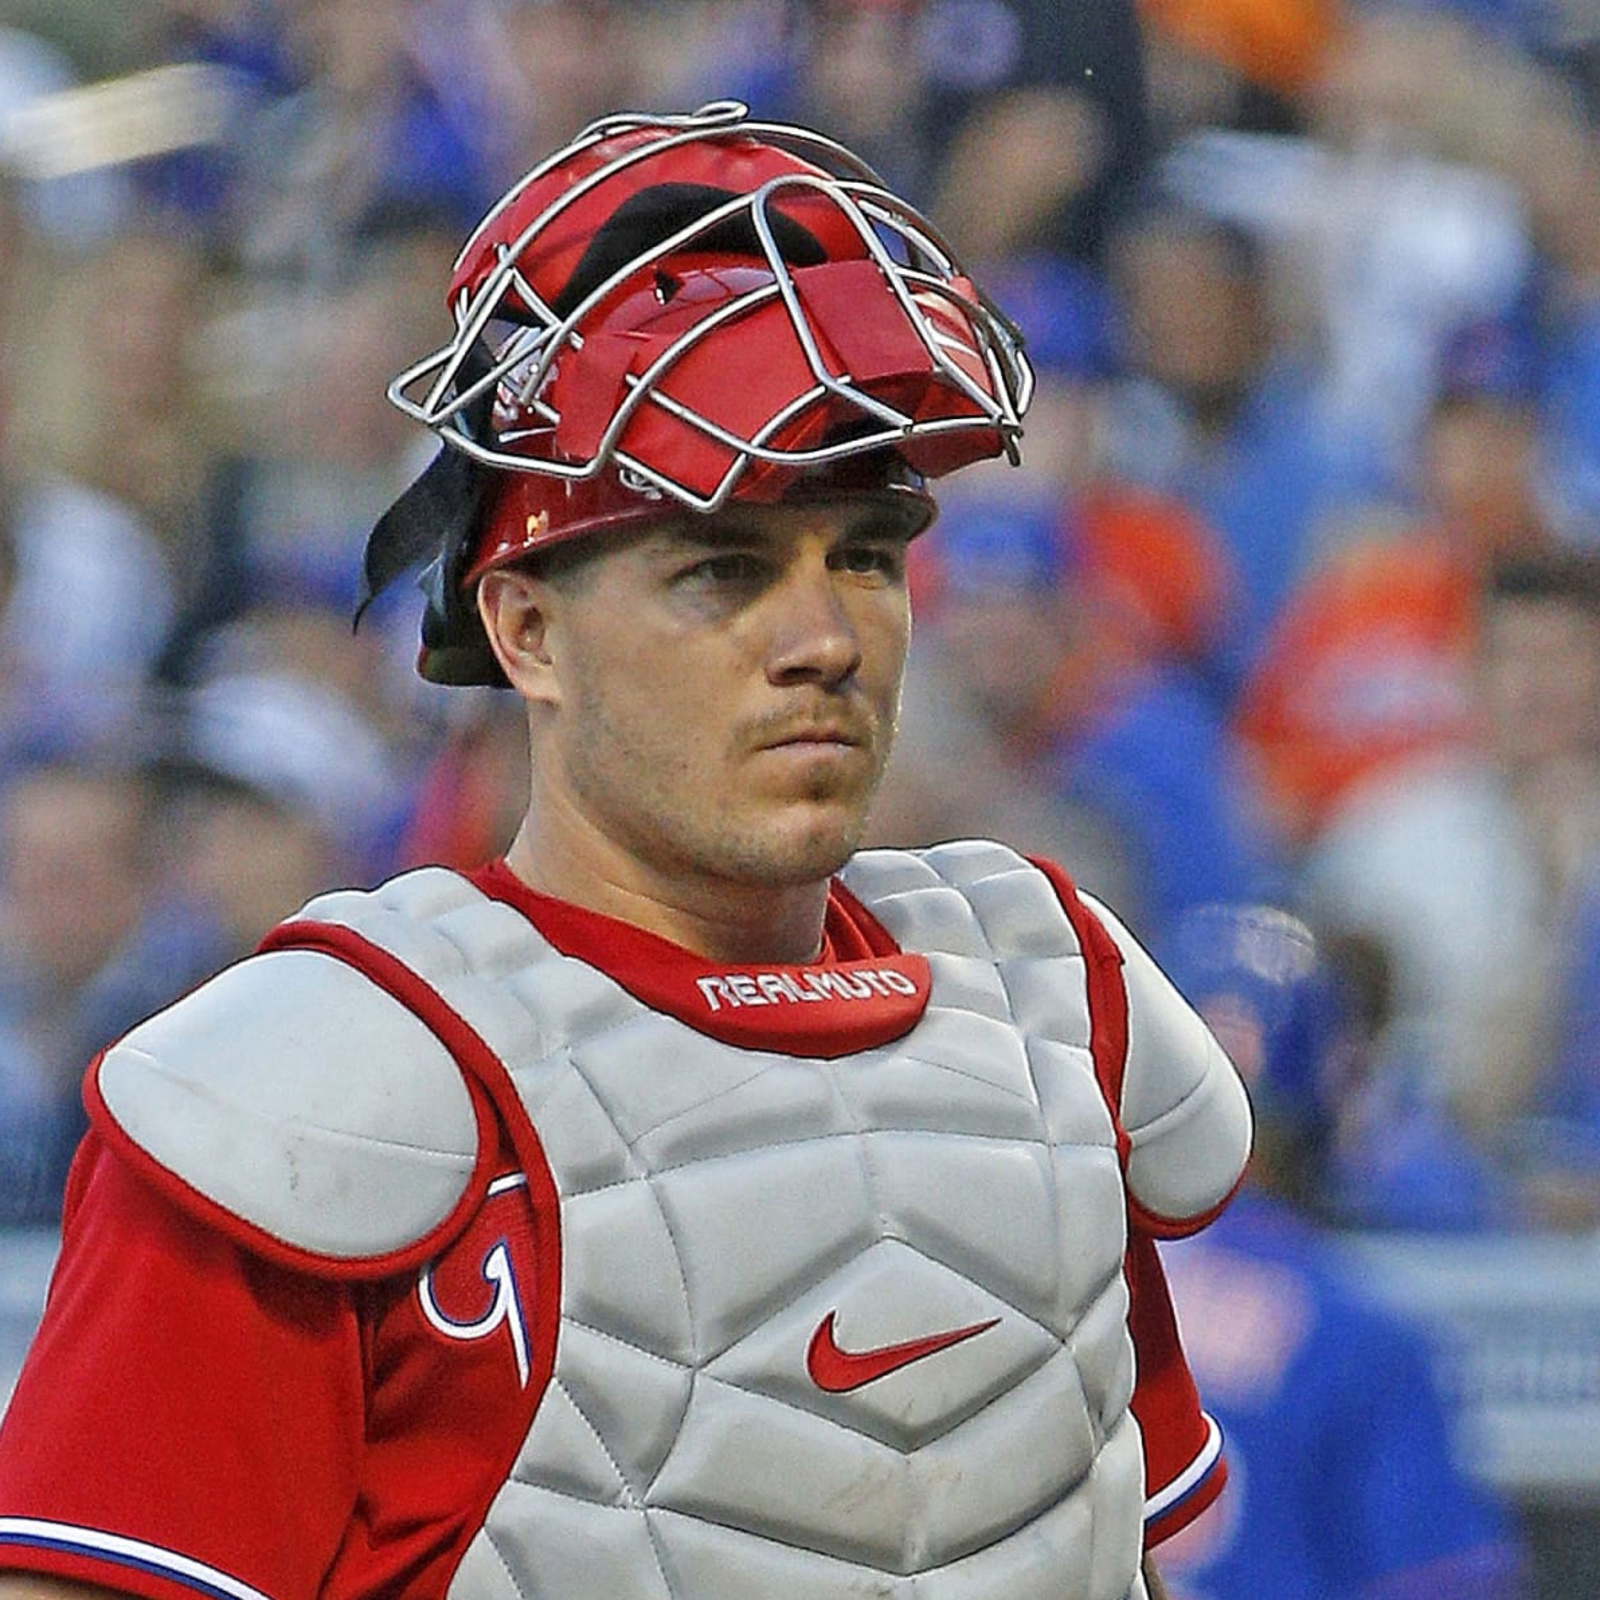 MLB Player Rankings for Top 25 Catchers of 2021 Season